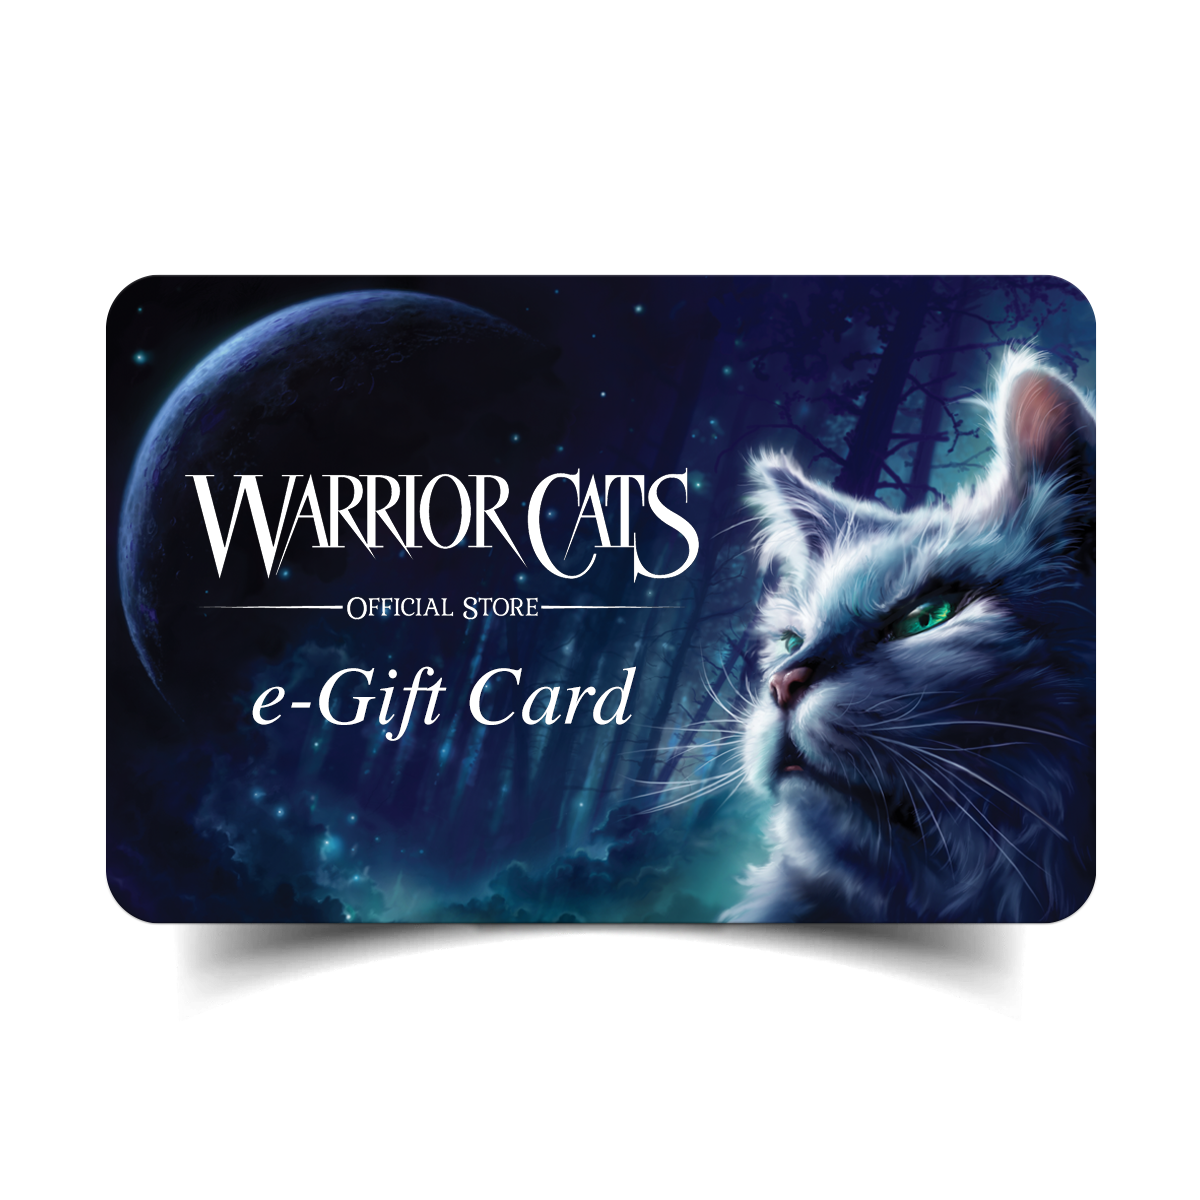 Warrior Cats Store e-Gift Card